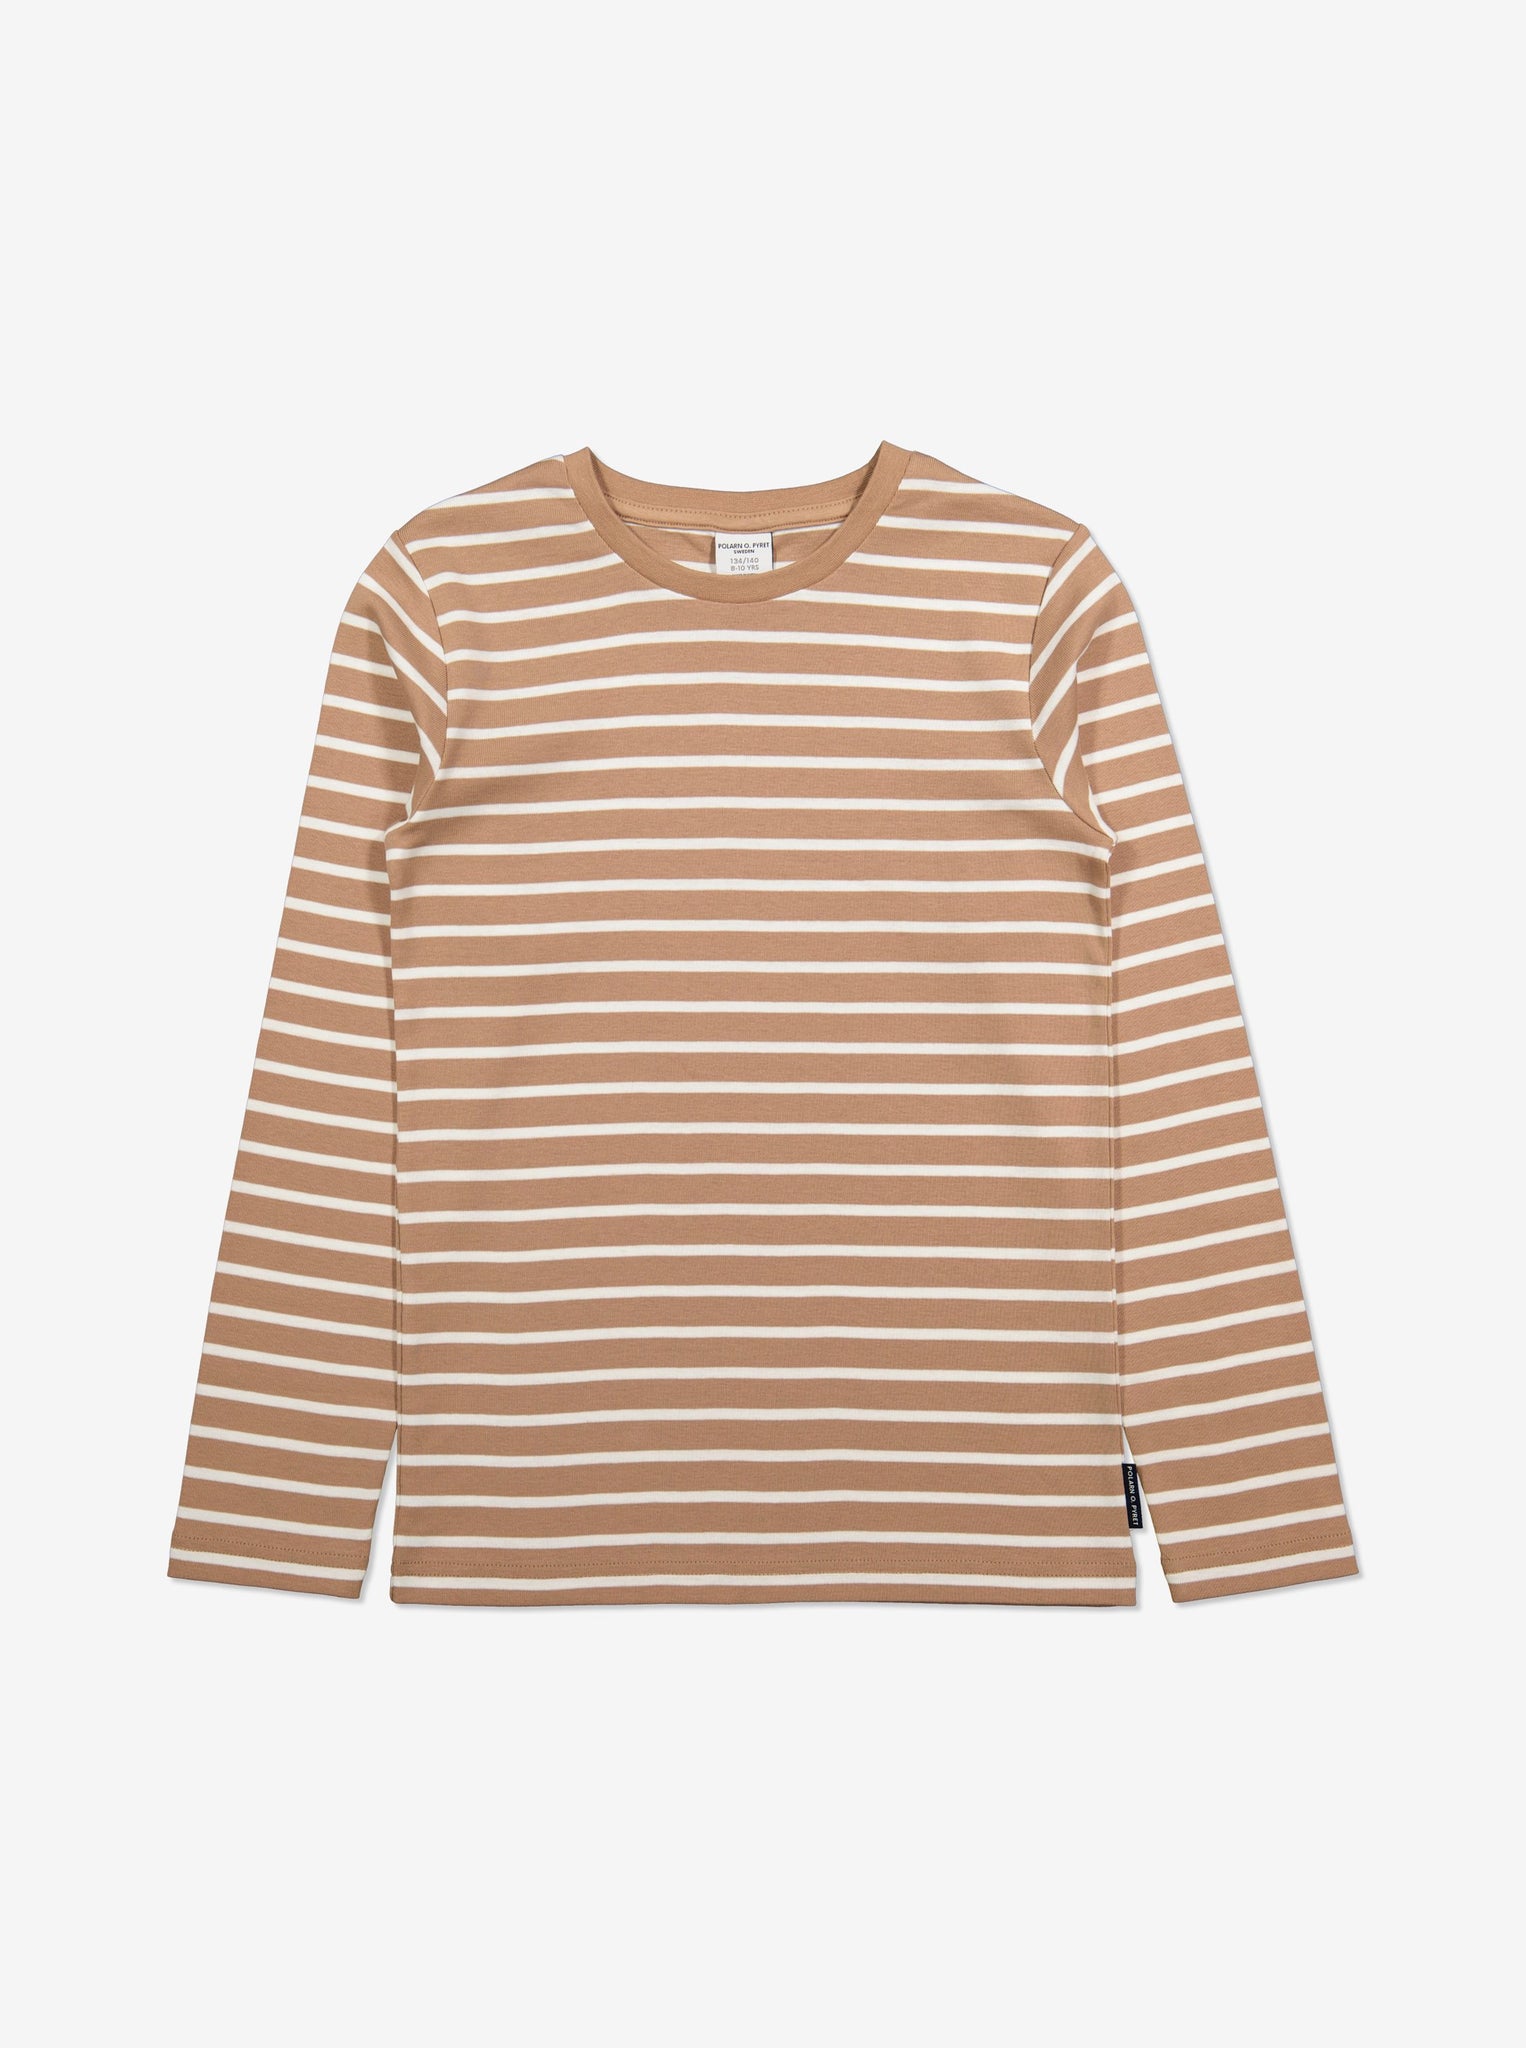  Organic Striped Brown Kids Top from Polarn O. Pyret Kidswear. Made with 100% organic cotton.